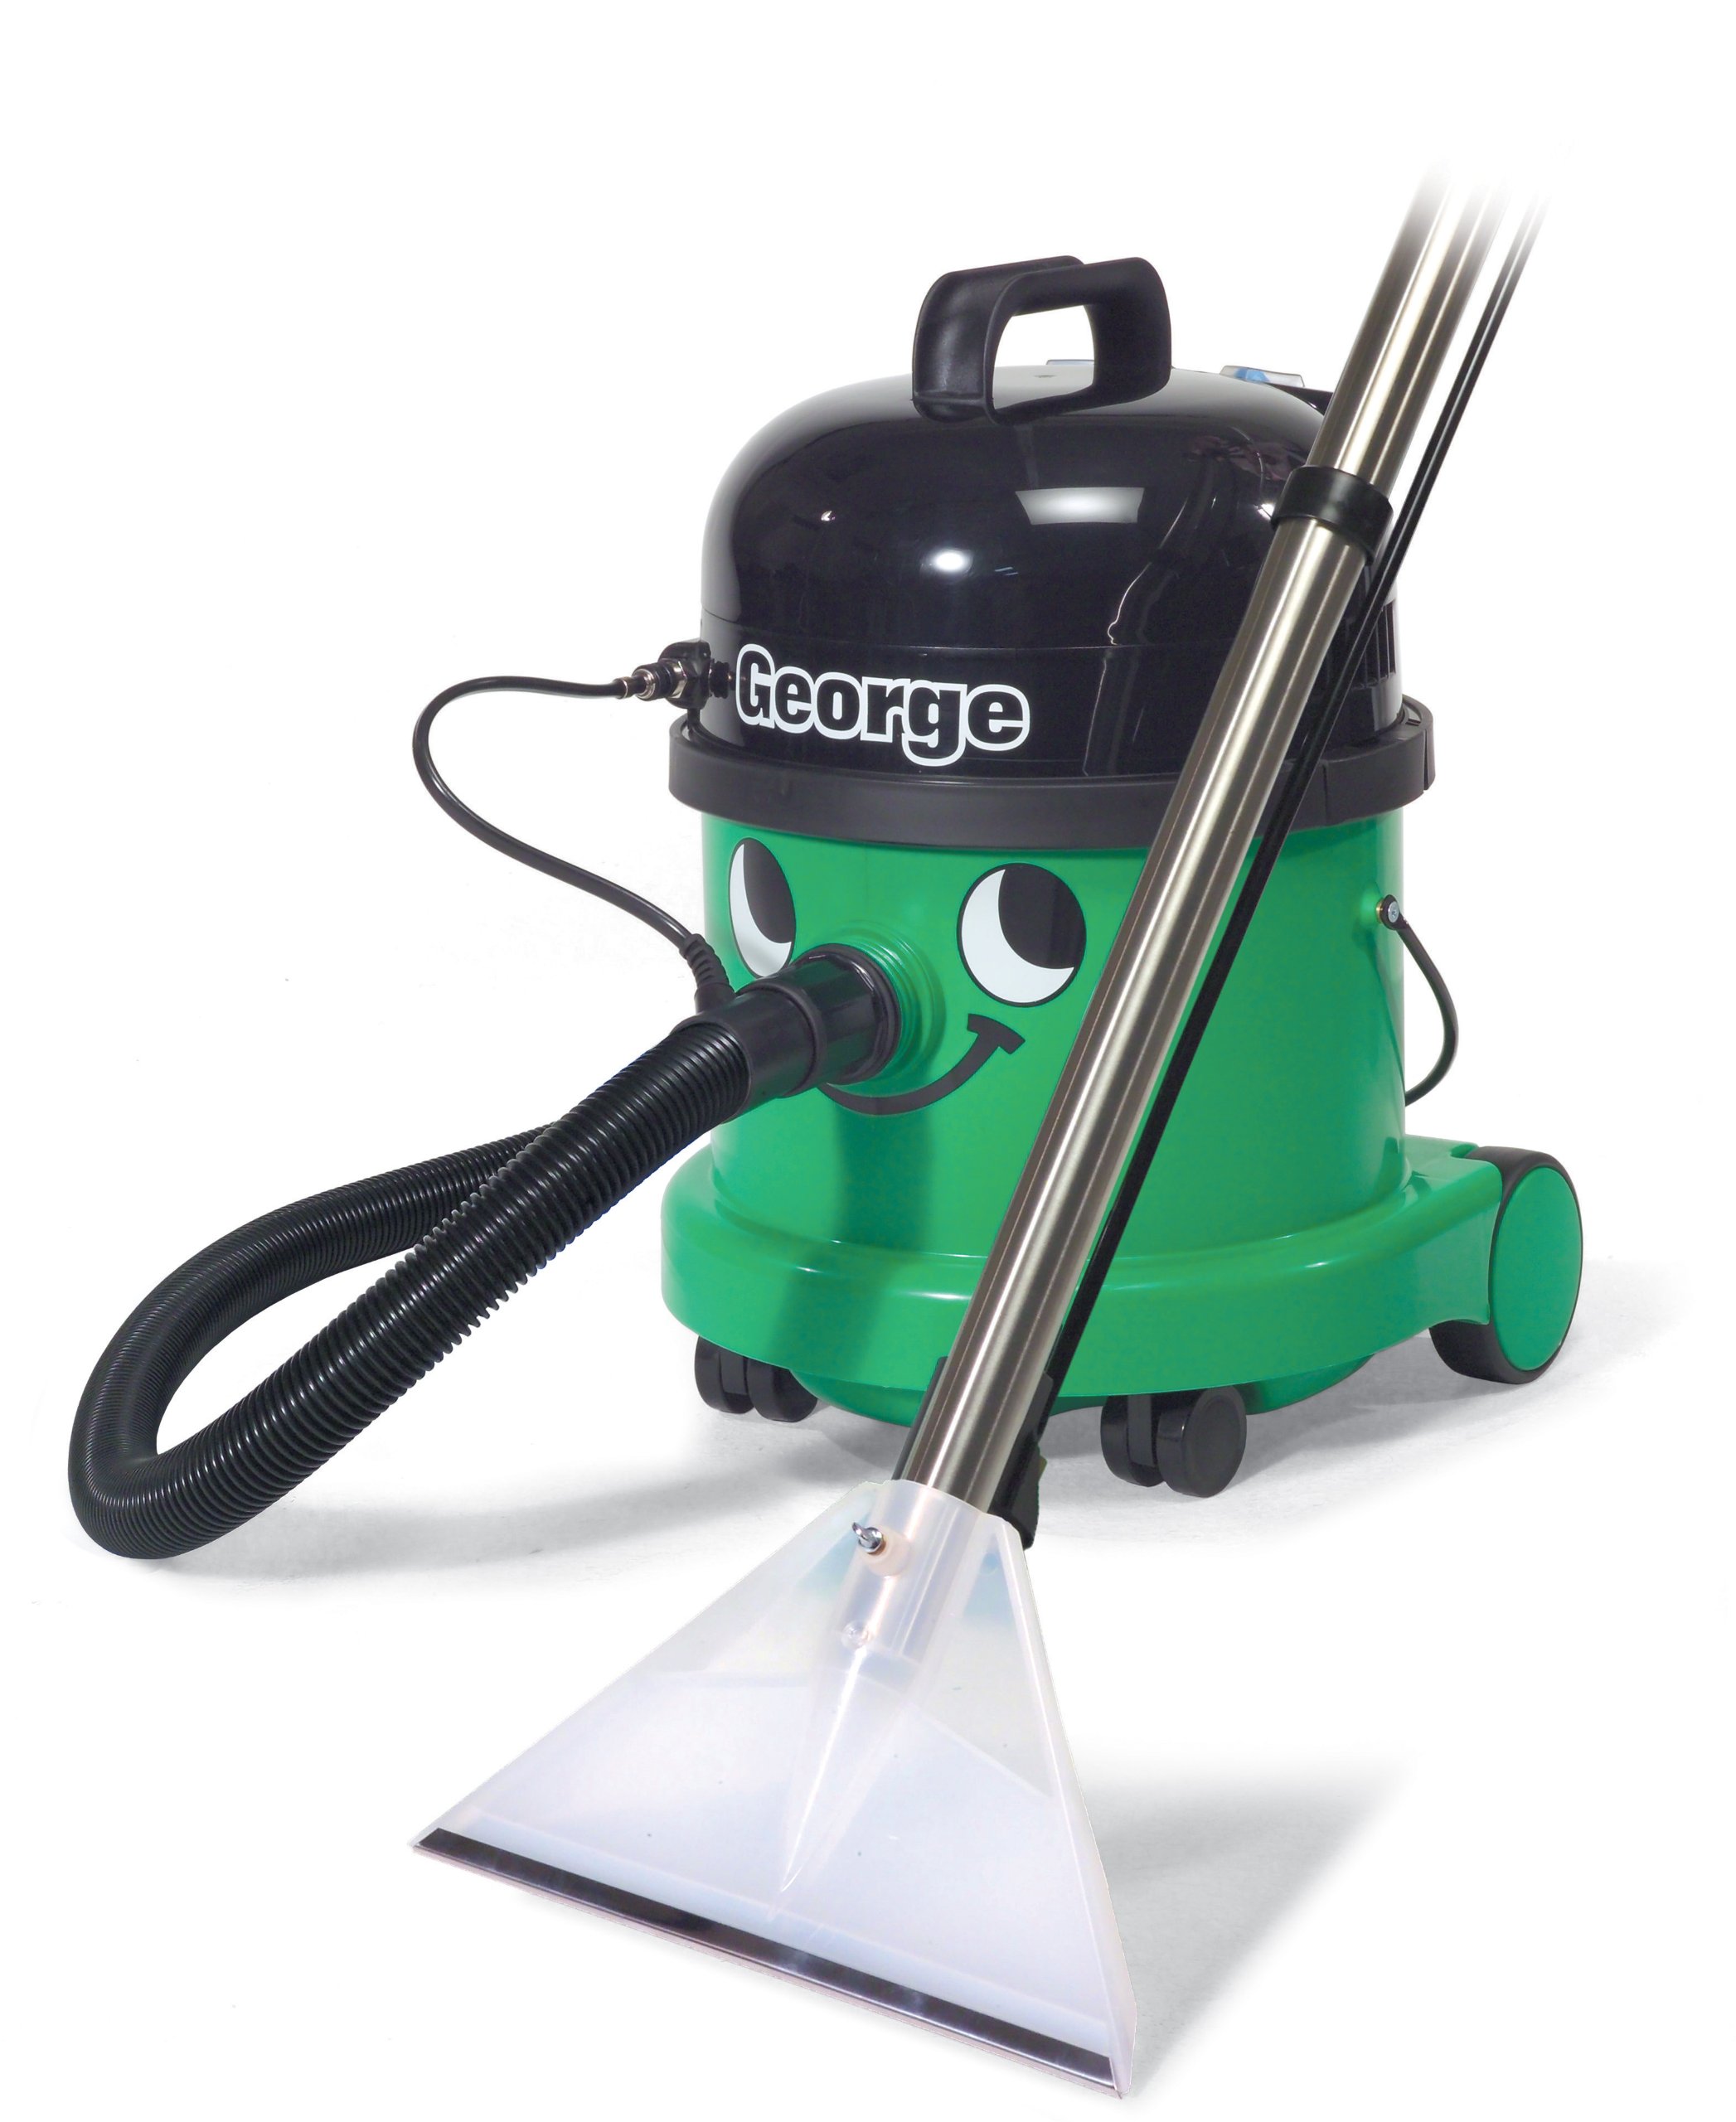 NaceCare GVE 370 "George" Wet/Dry/ Extractor Vacuum with a 26A kit - image 3 of 3